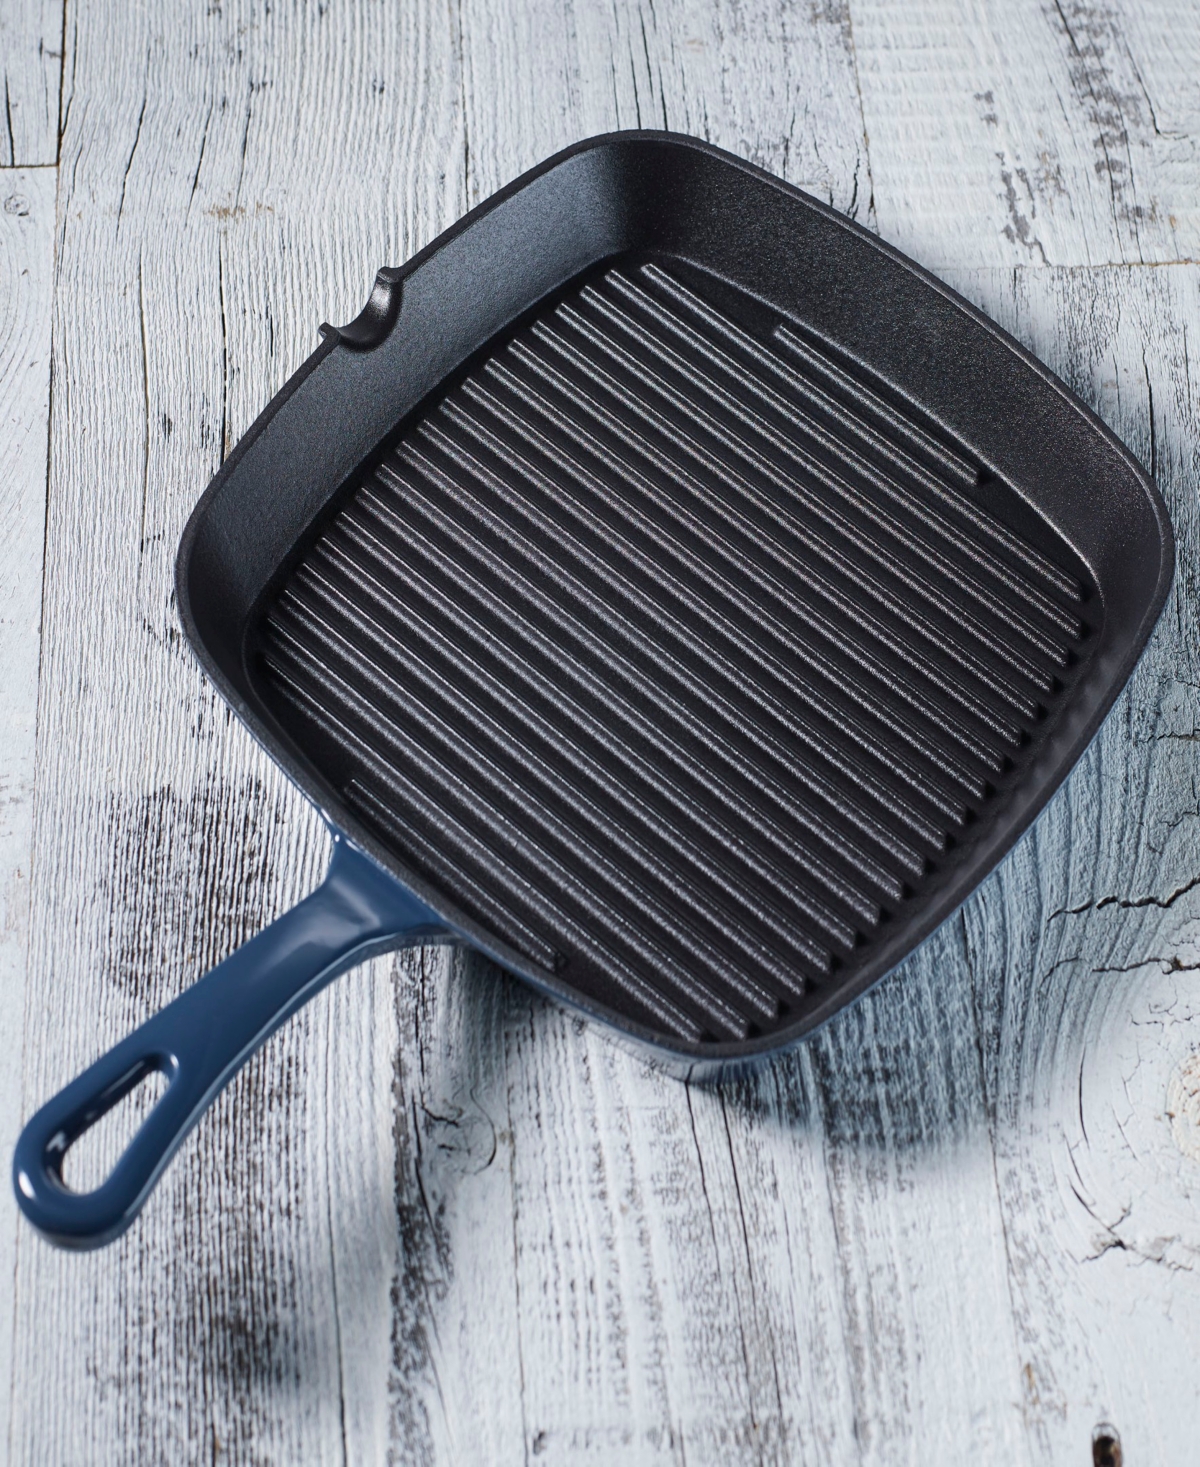 Cuisinart Chefs Classic Enameled Cast Iron 9.25" Square Grill Pan In Provencal Blue